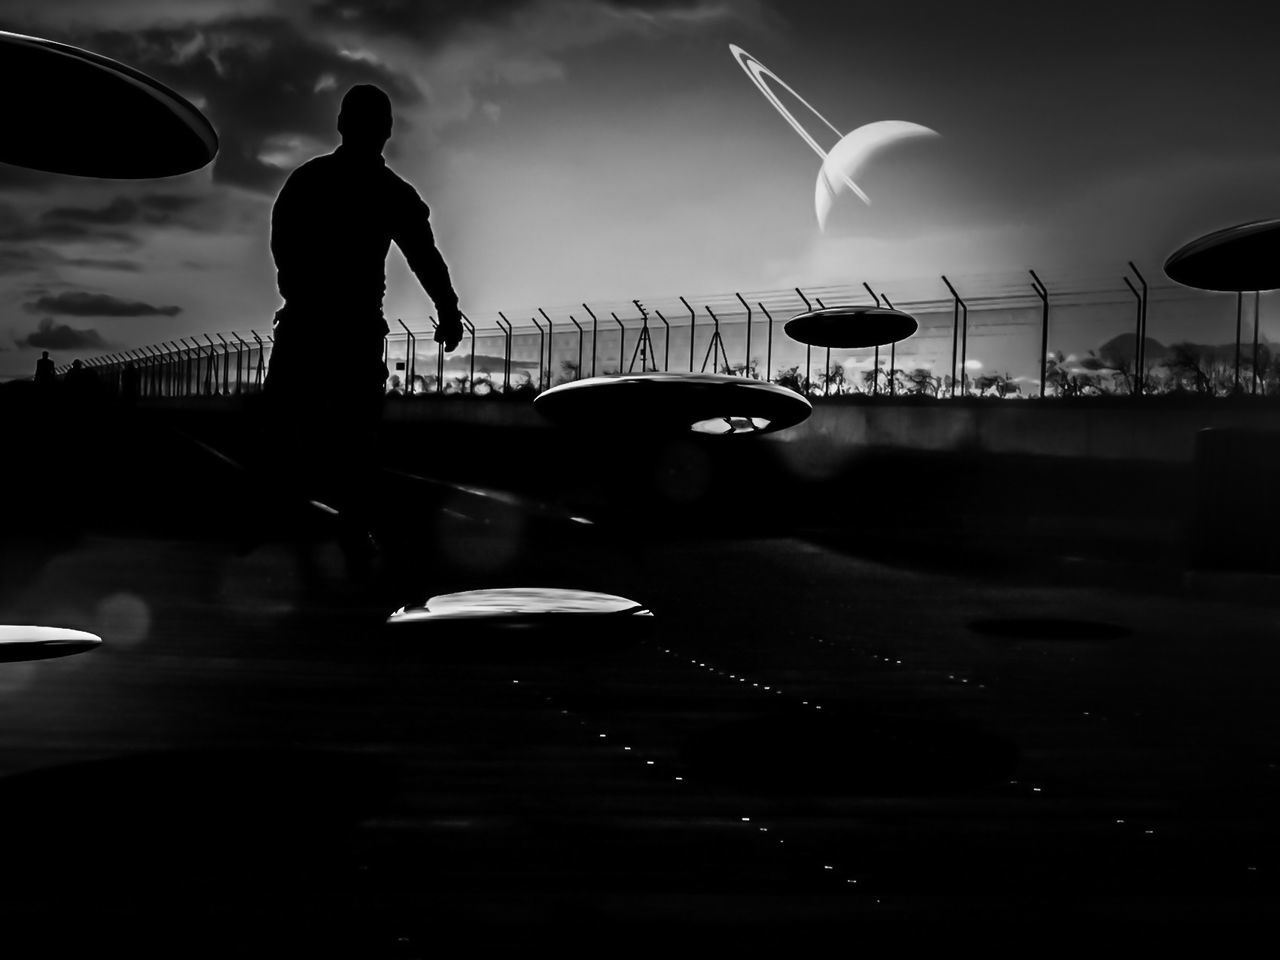 Silhouette of a person with a planet in the background